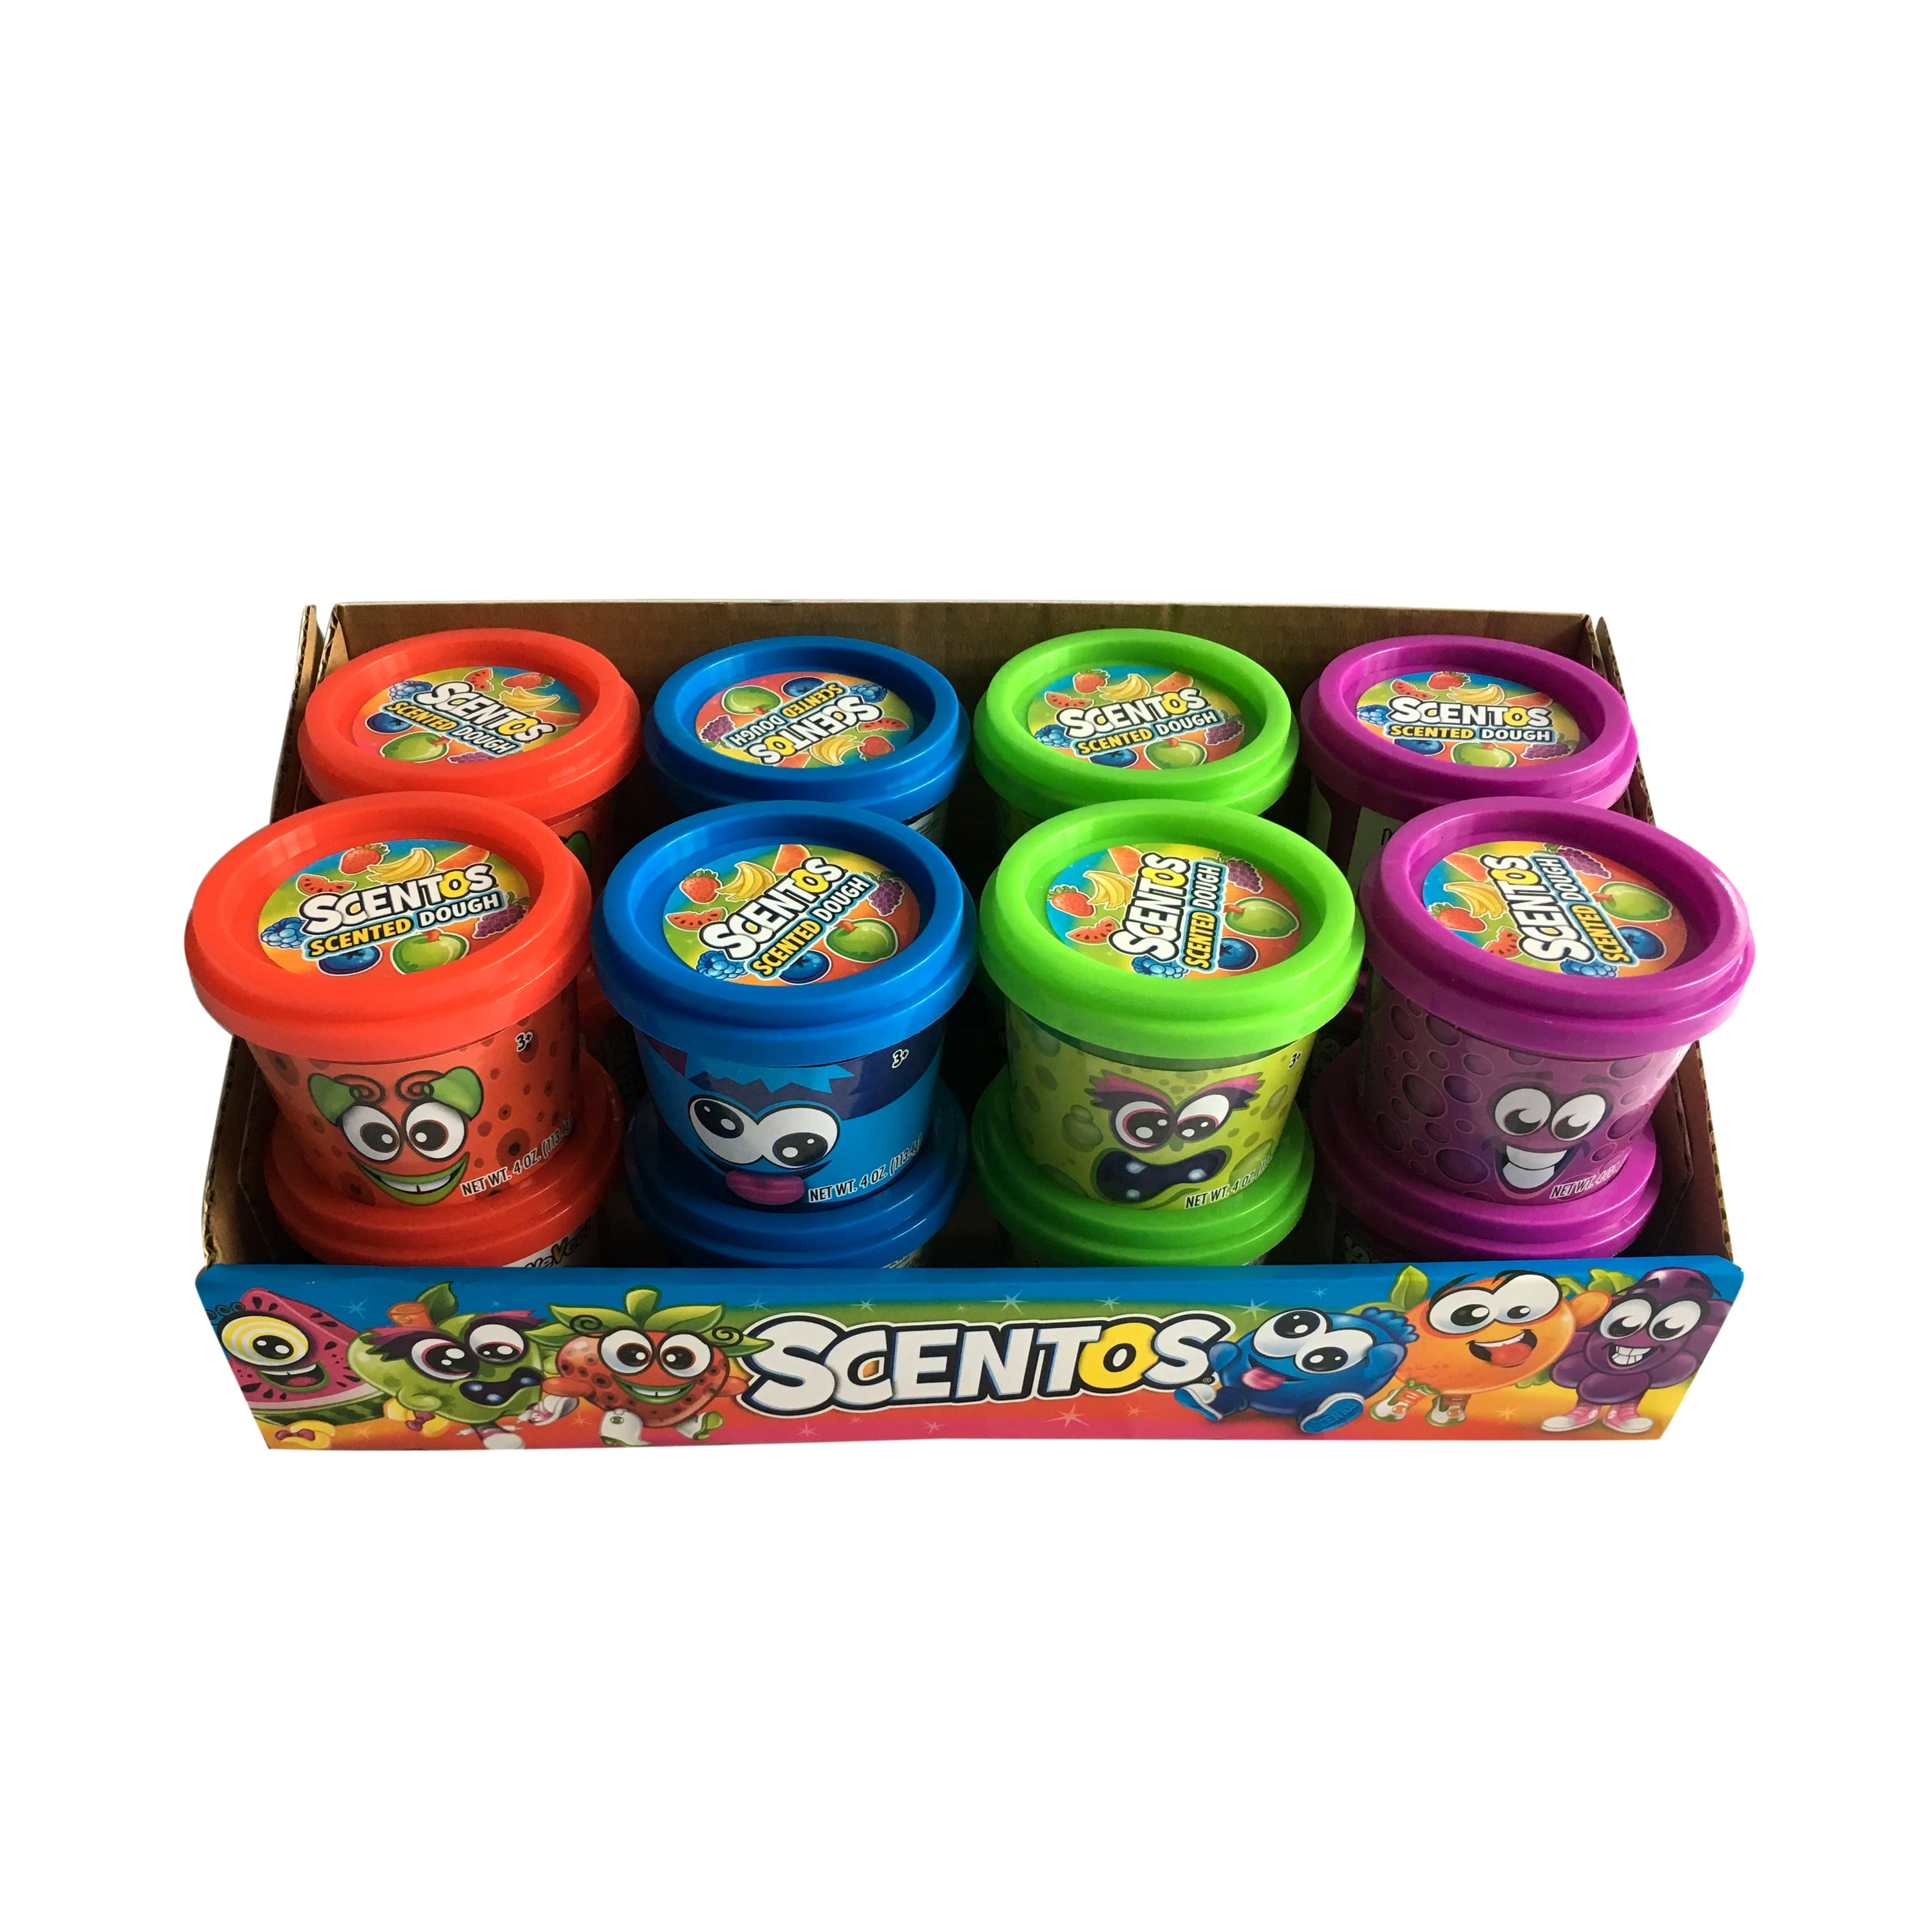 Scentos Scented Dough With Tools 10 Pack Modeling Clay Create Star 42e for sale online 